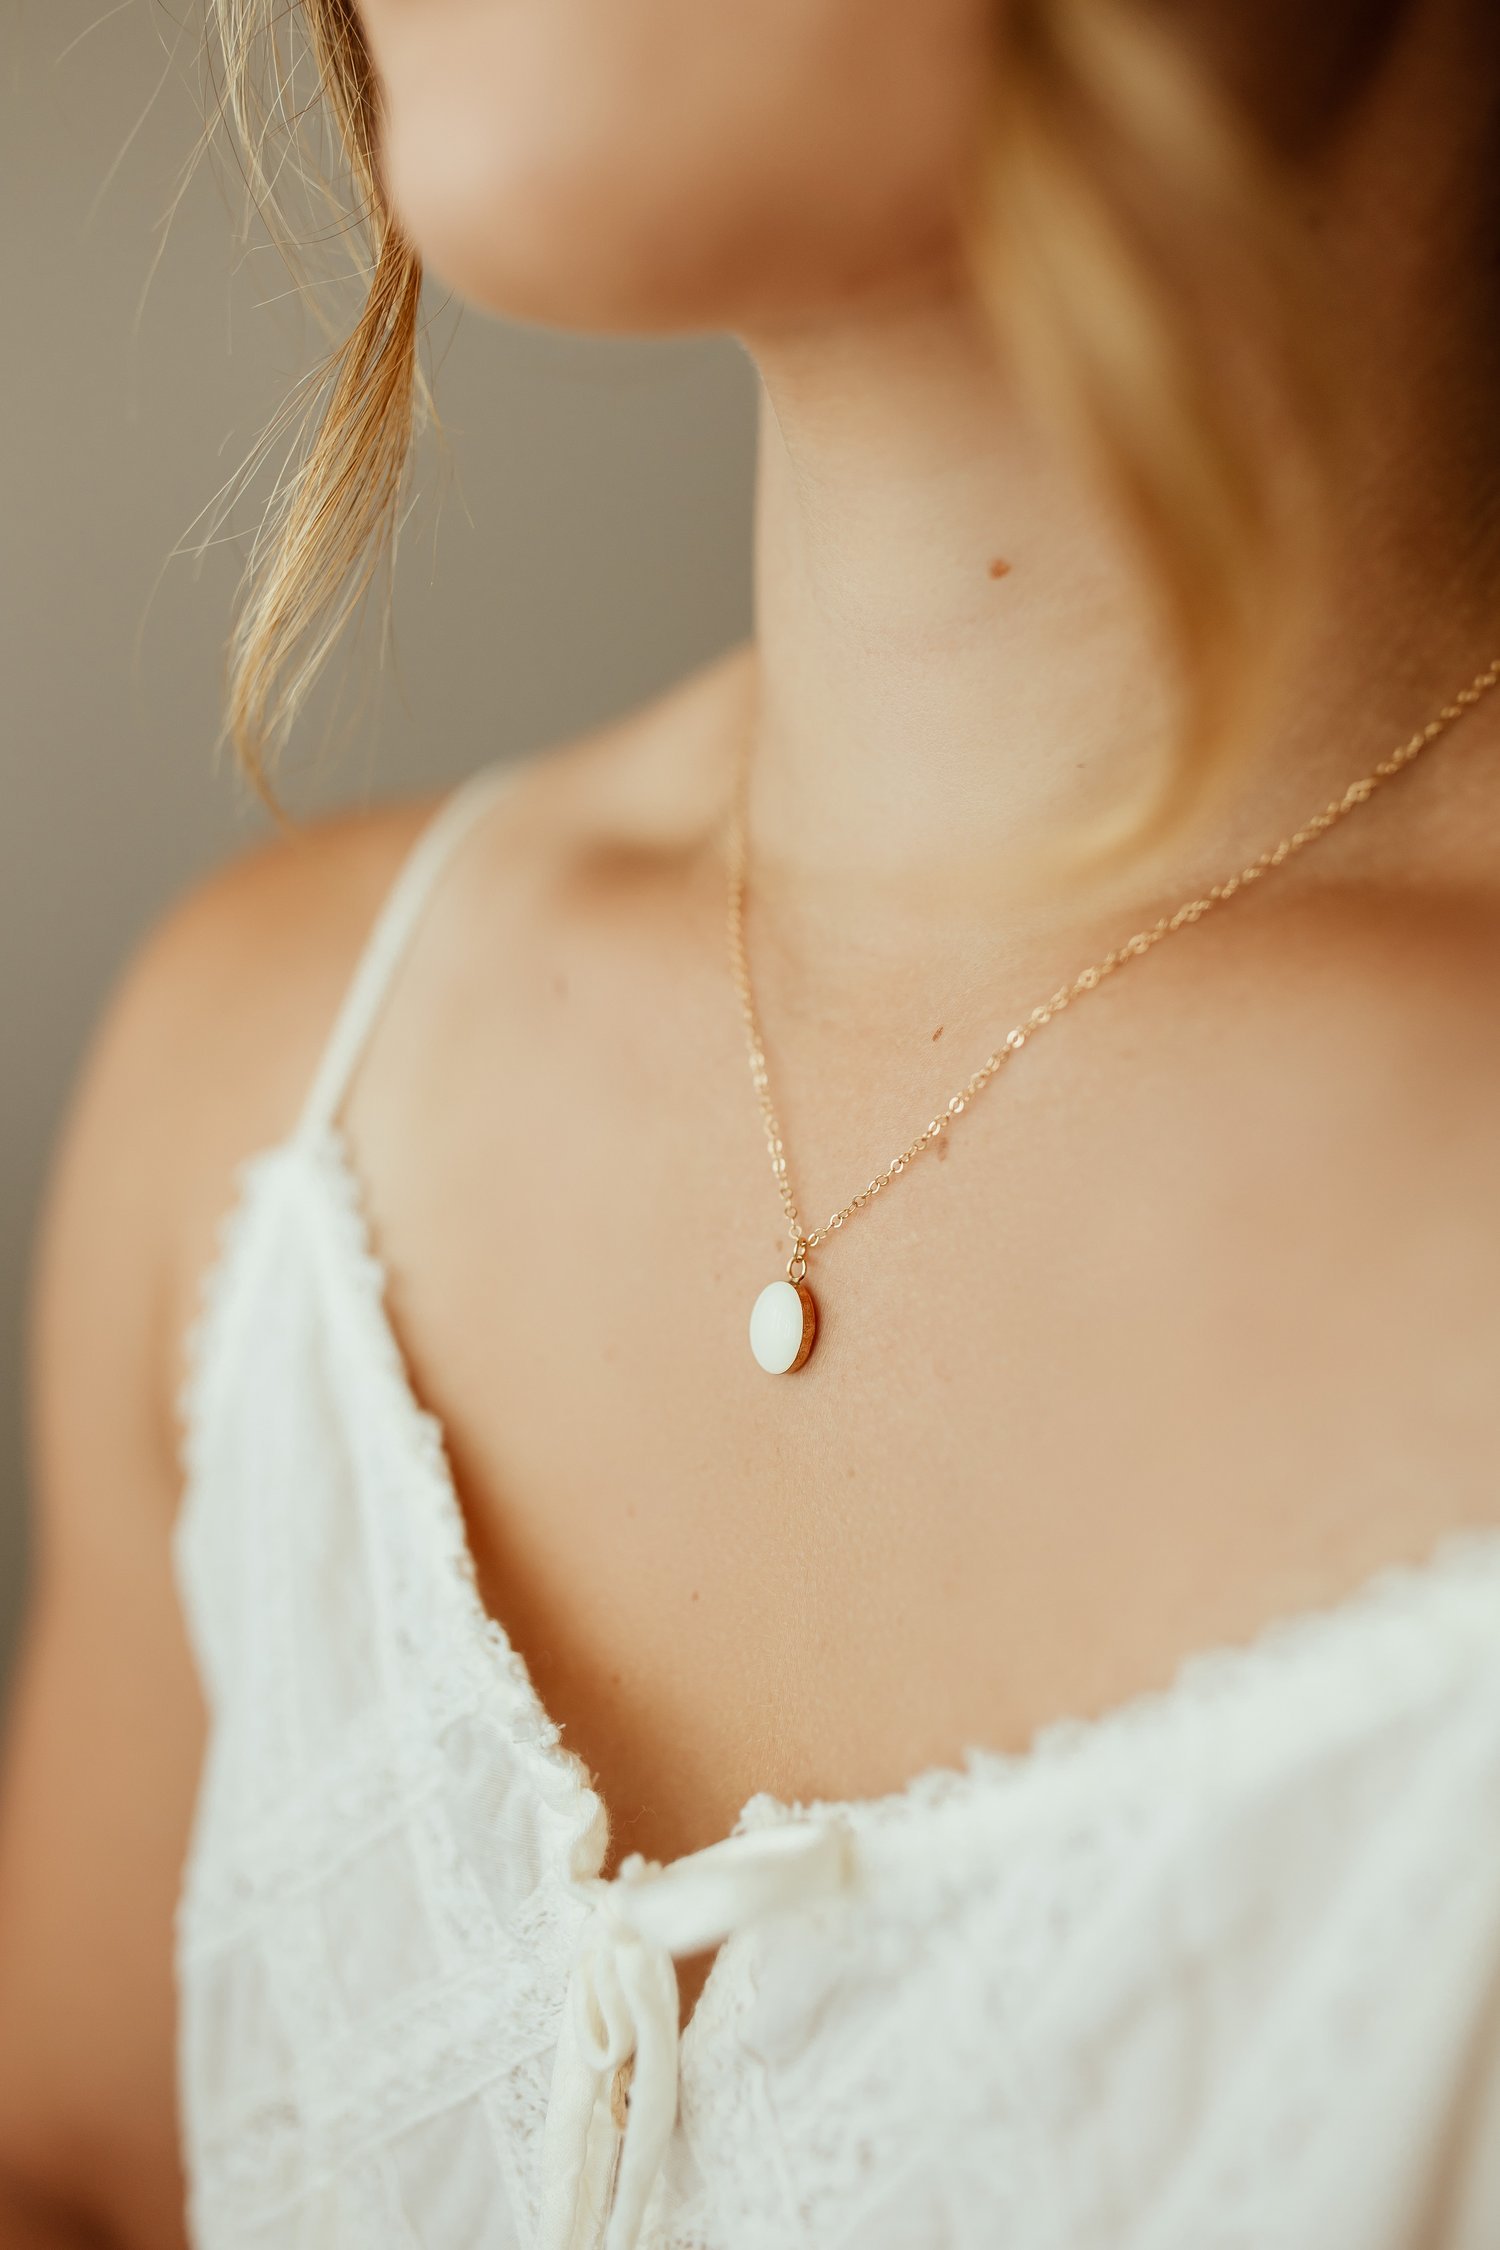 How to Make Your Own Breastmilk Jewelry: An Easy DIY Guide